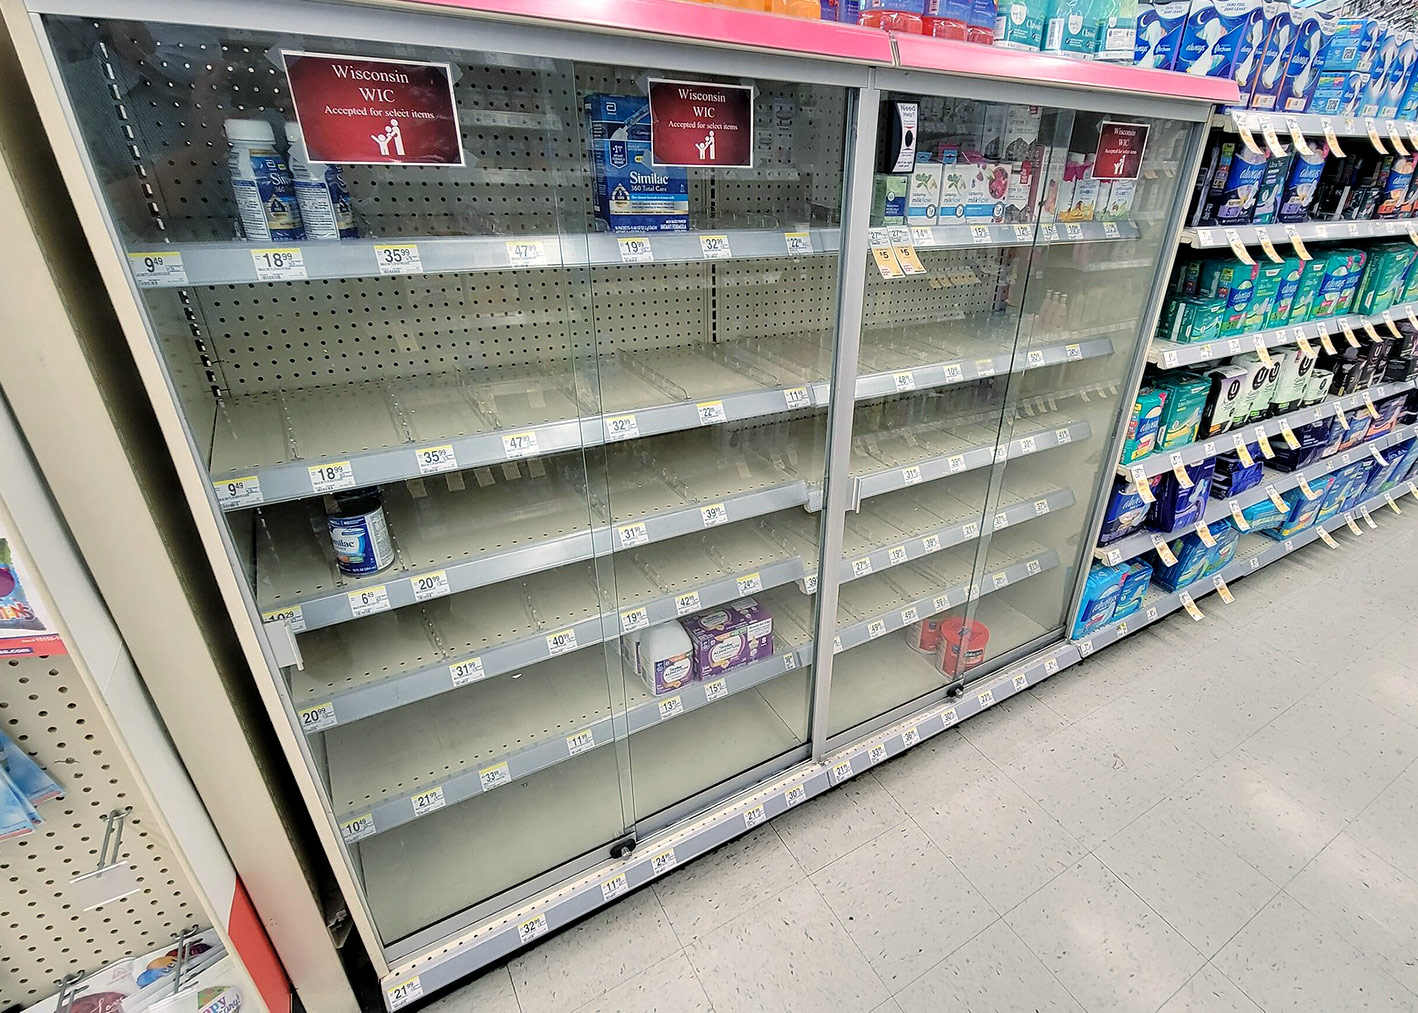 Shelves are bare at locations where people normally receive baby formula, like this Walgreens located on Milwaukee’s South Side. Photo by Matt Martinez/NNS.